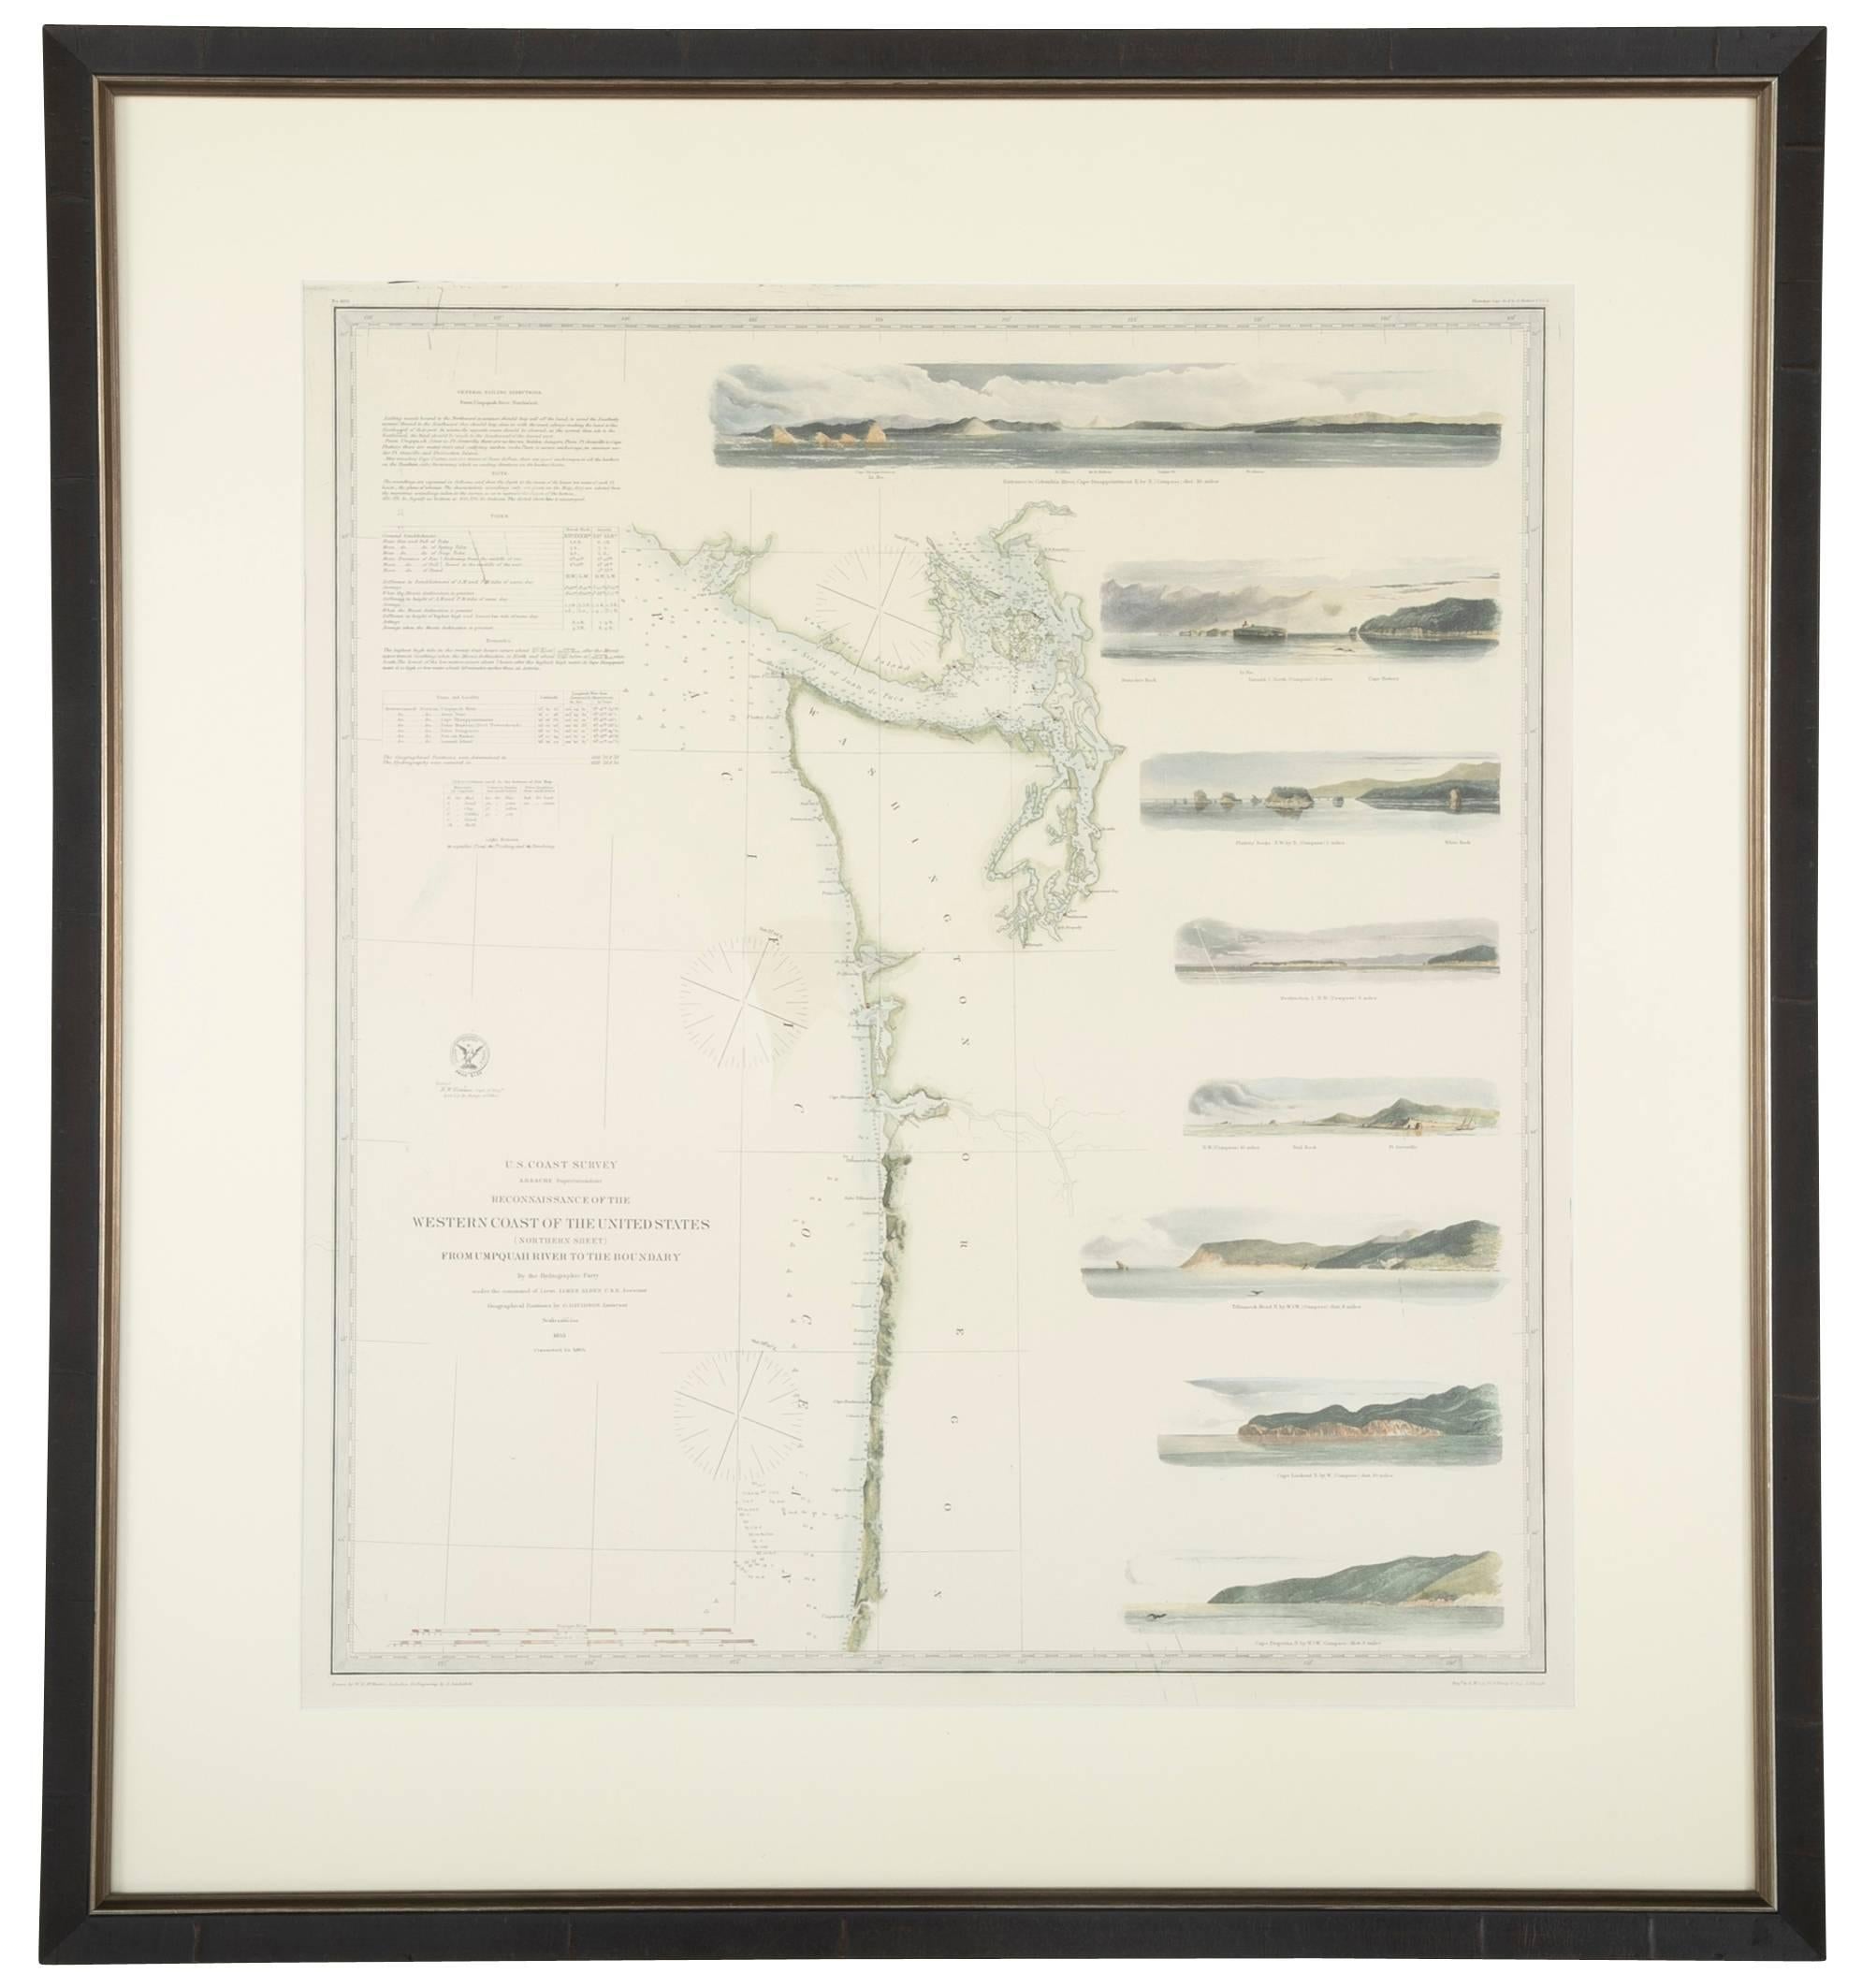 Set of three mid-19th century maritime charts of the California coast from the famous U.S. Coast Survey project. Included are San Diego to San Francisco, San Francisco to the Umpquah River (Oregon) and Umpquah River to the Boundary (Vancouver). The